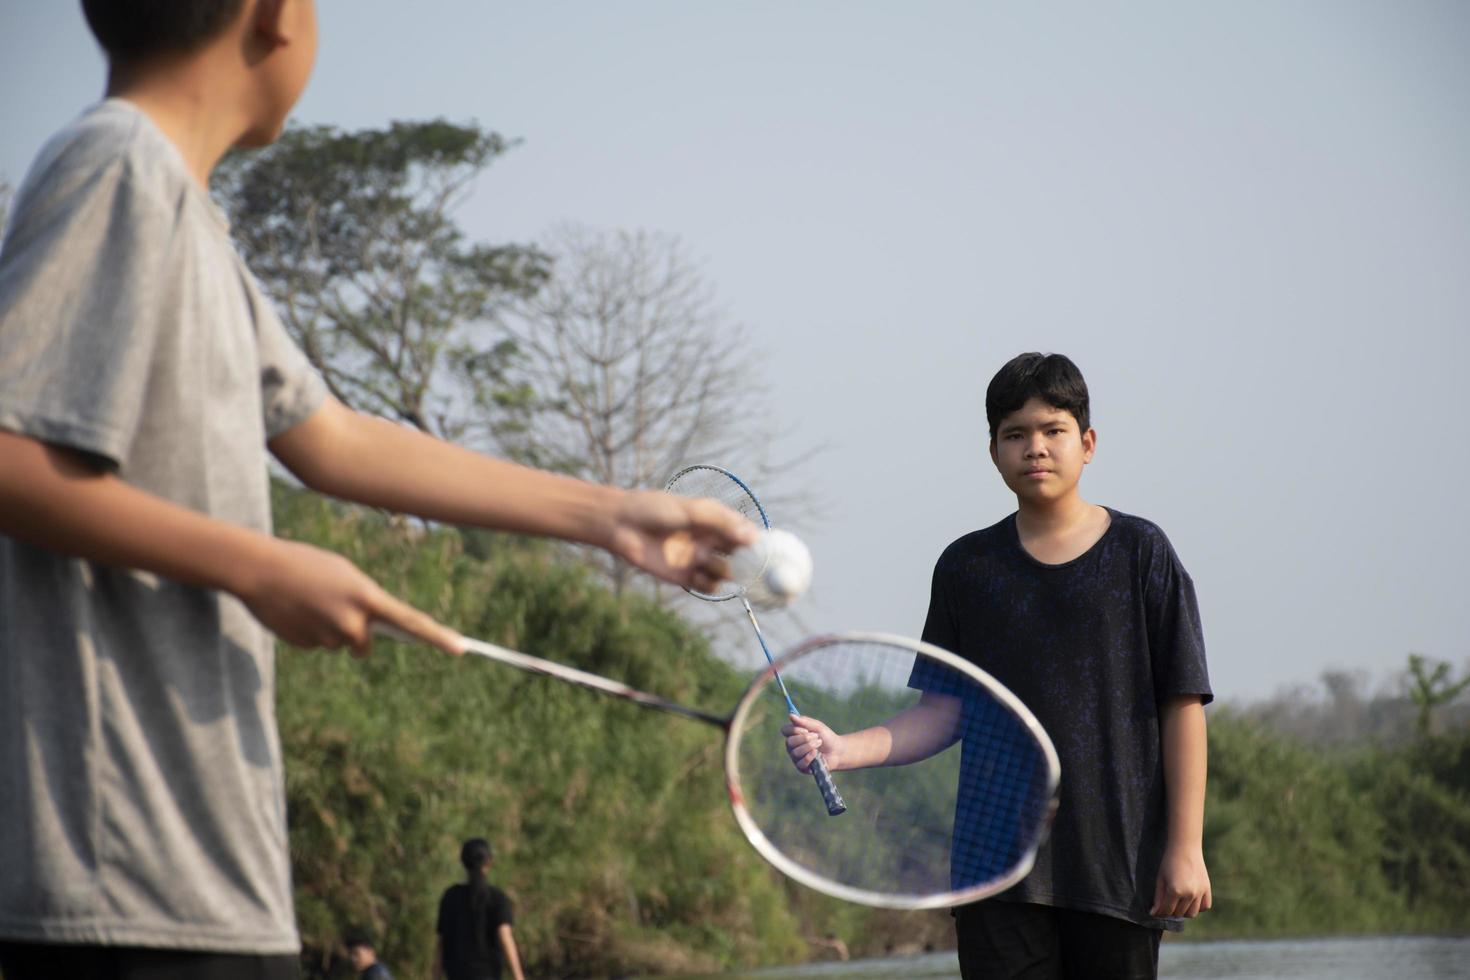 Asian boys hold badminton shuttlecock and racket, standing and playing beside the river bank in their local river during their weekend holiday, soft and selective focus on front boy in white shirt. photo